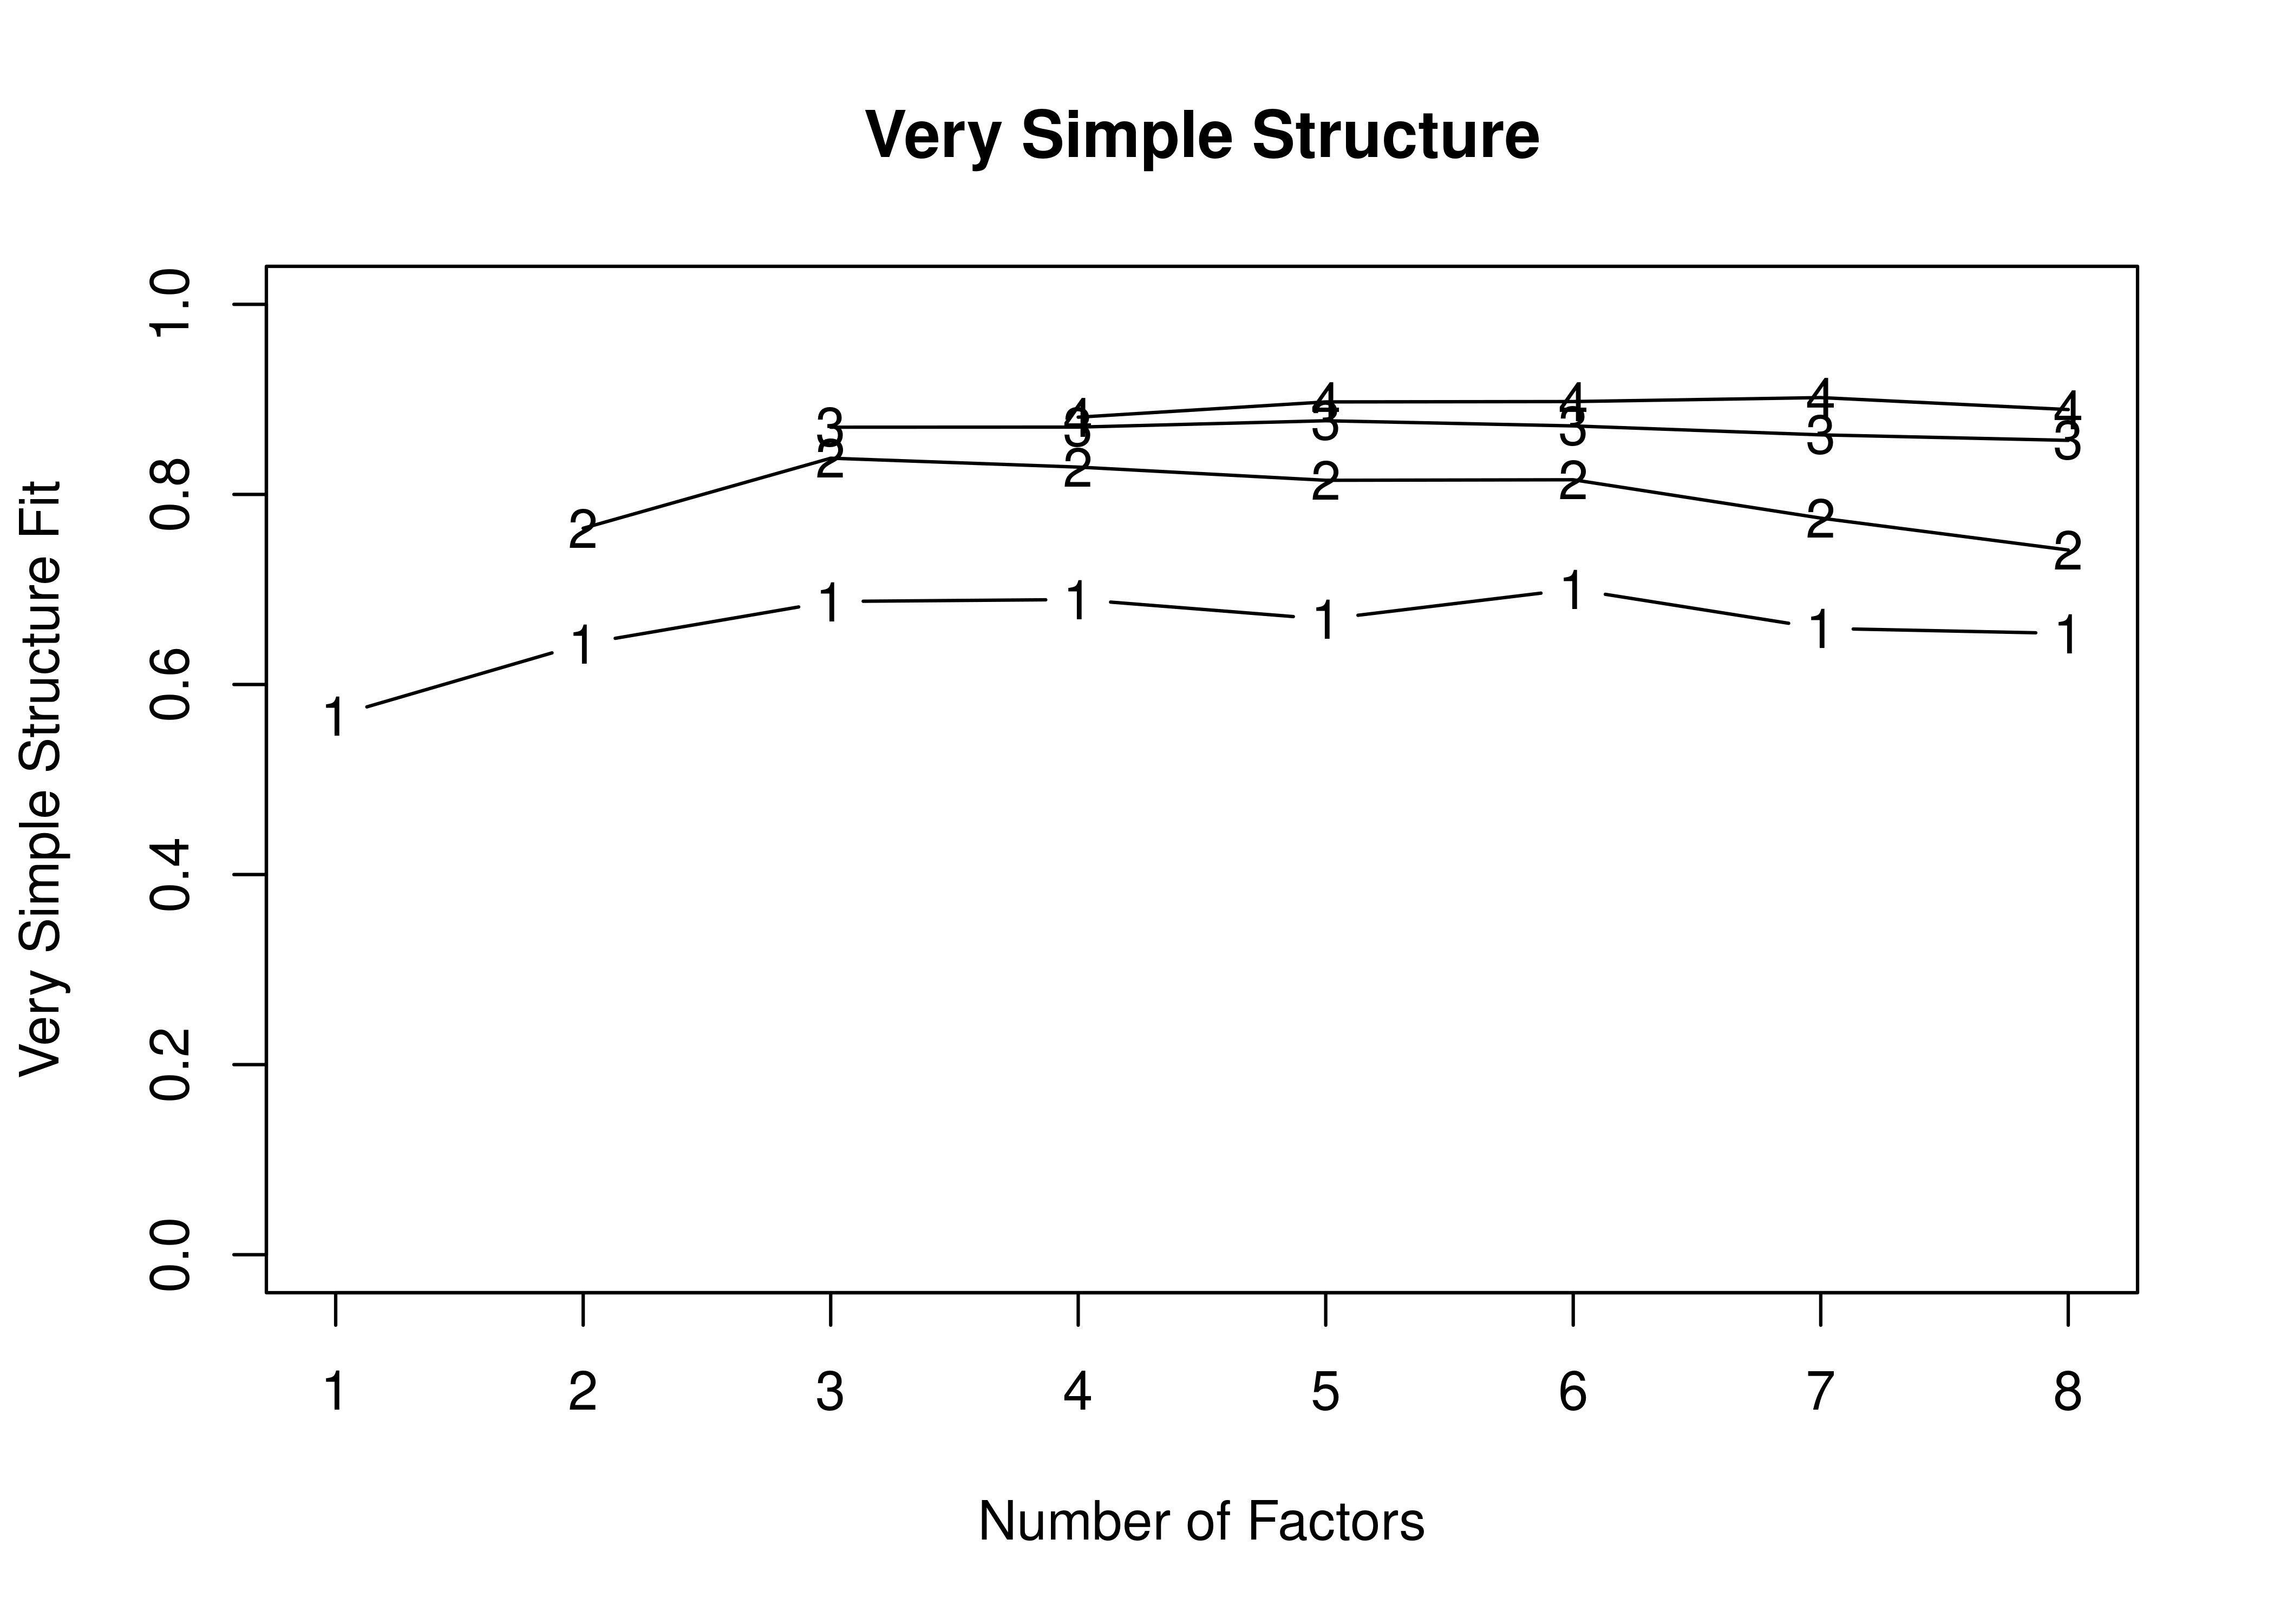 Very Simple Structure Plot With Orthogonal Rotation in Exploratory Factor Analysis.